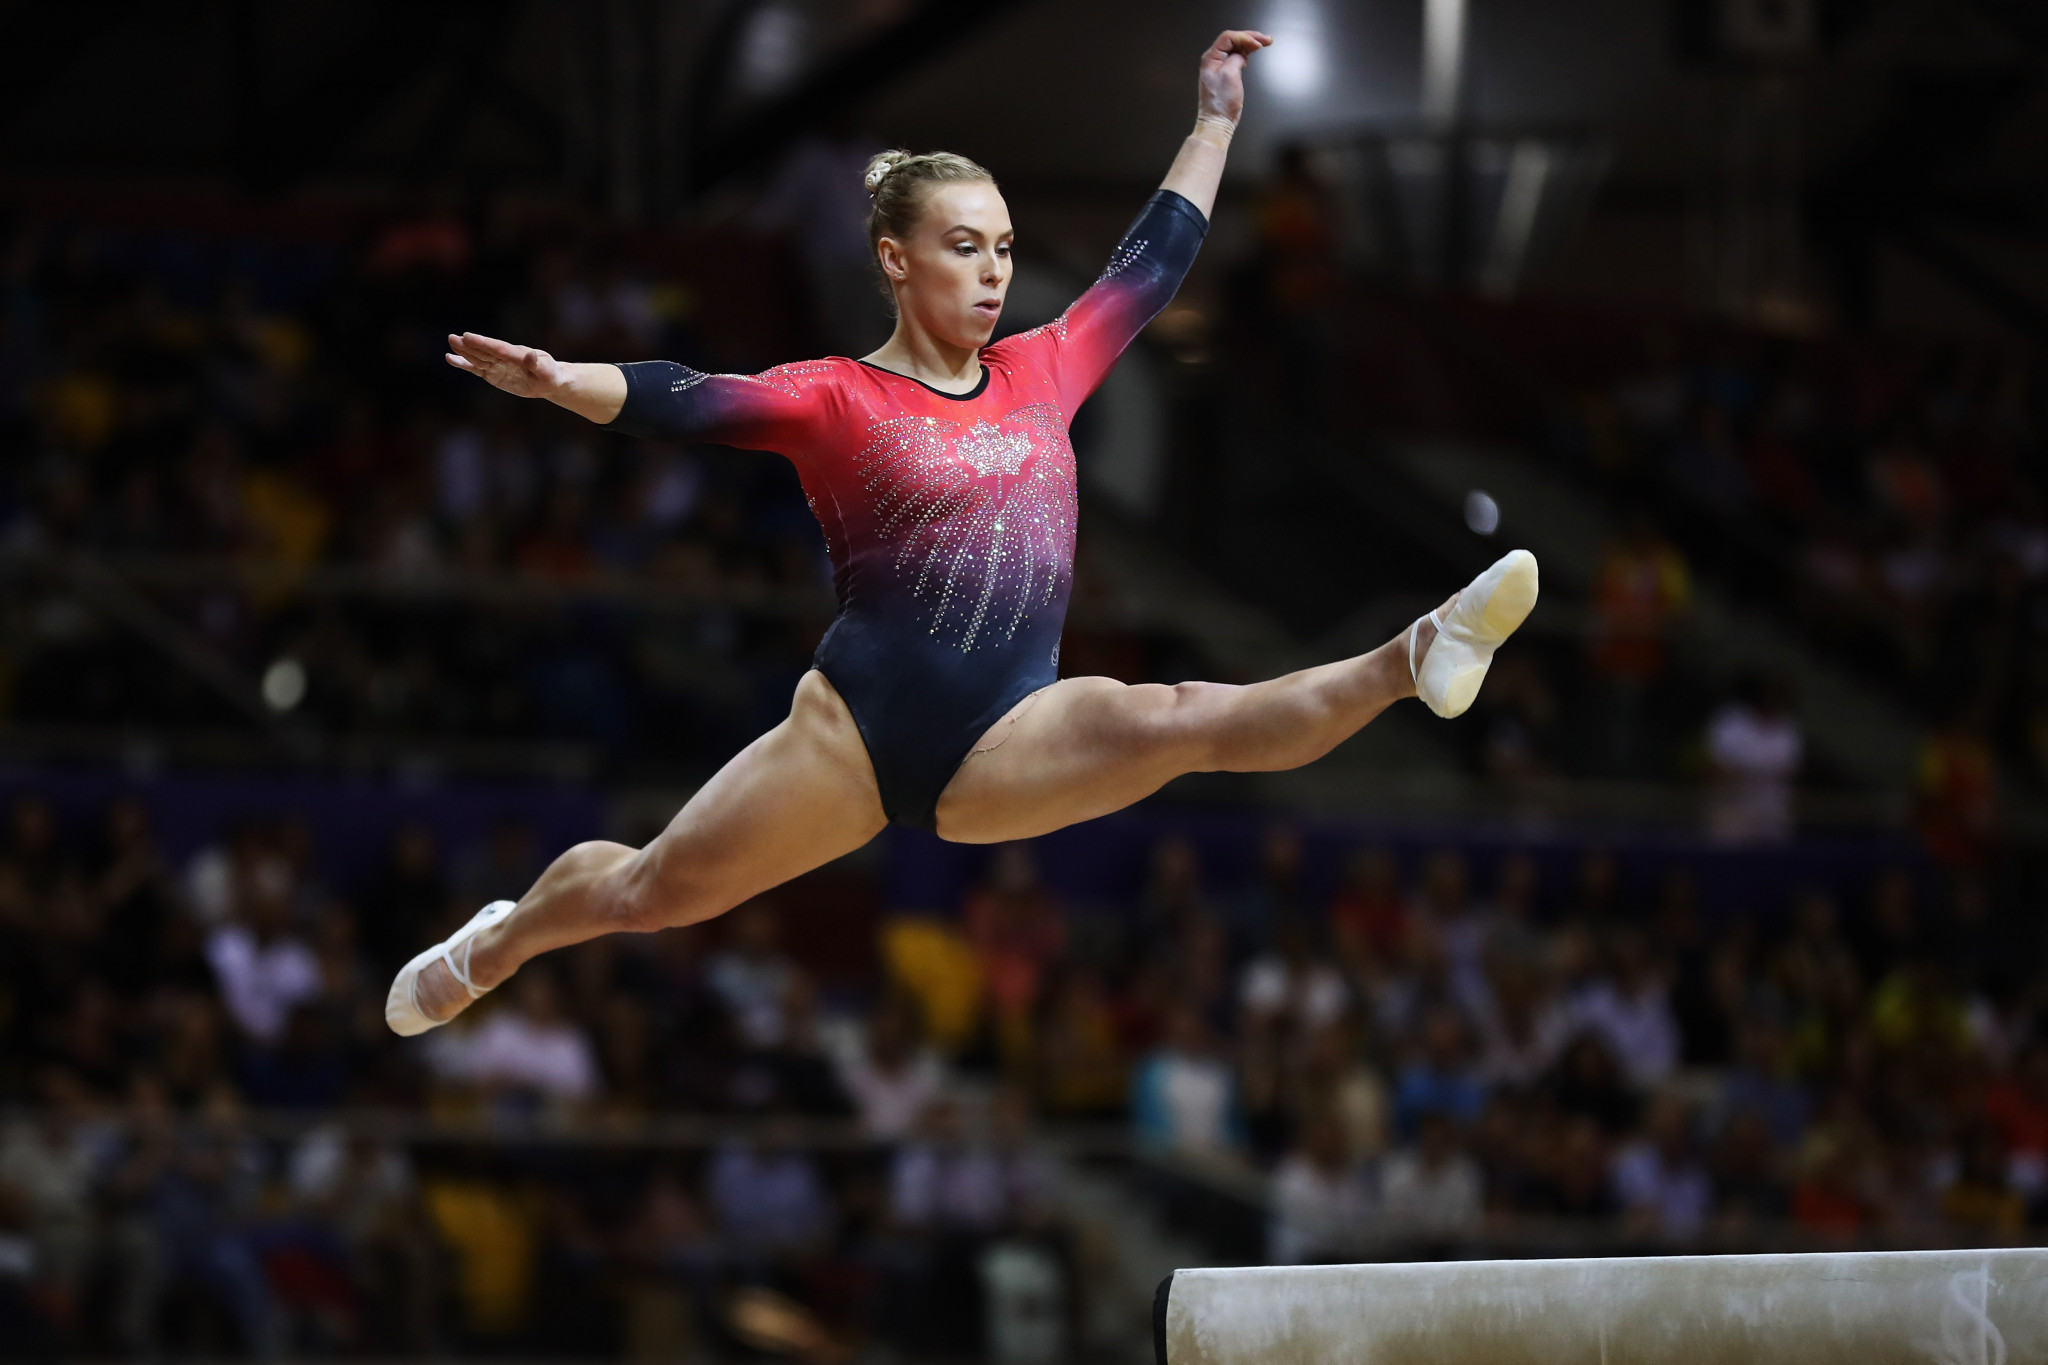 Ellie Black of Canada is among the women hoping to claim gold at the All-Around World Cup ©Getty Images